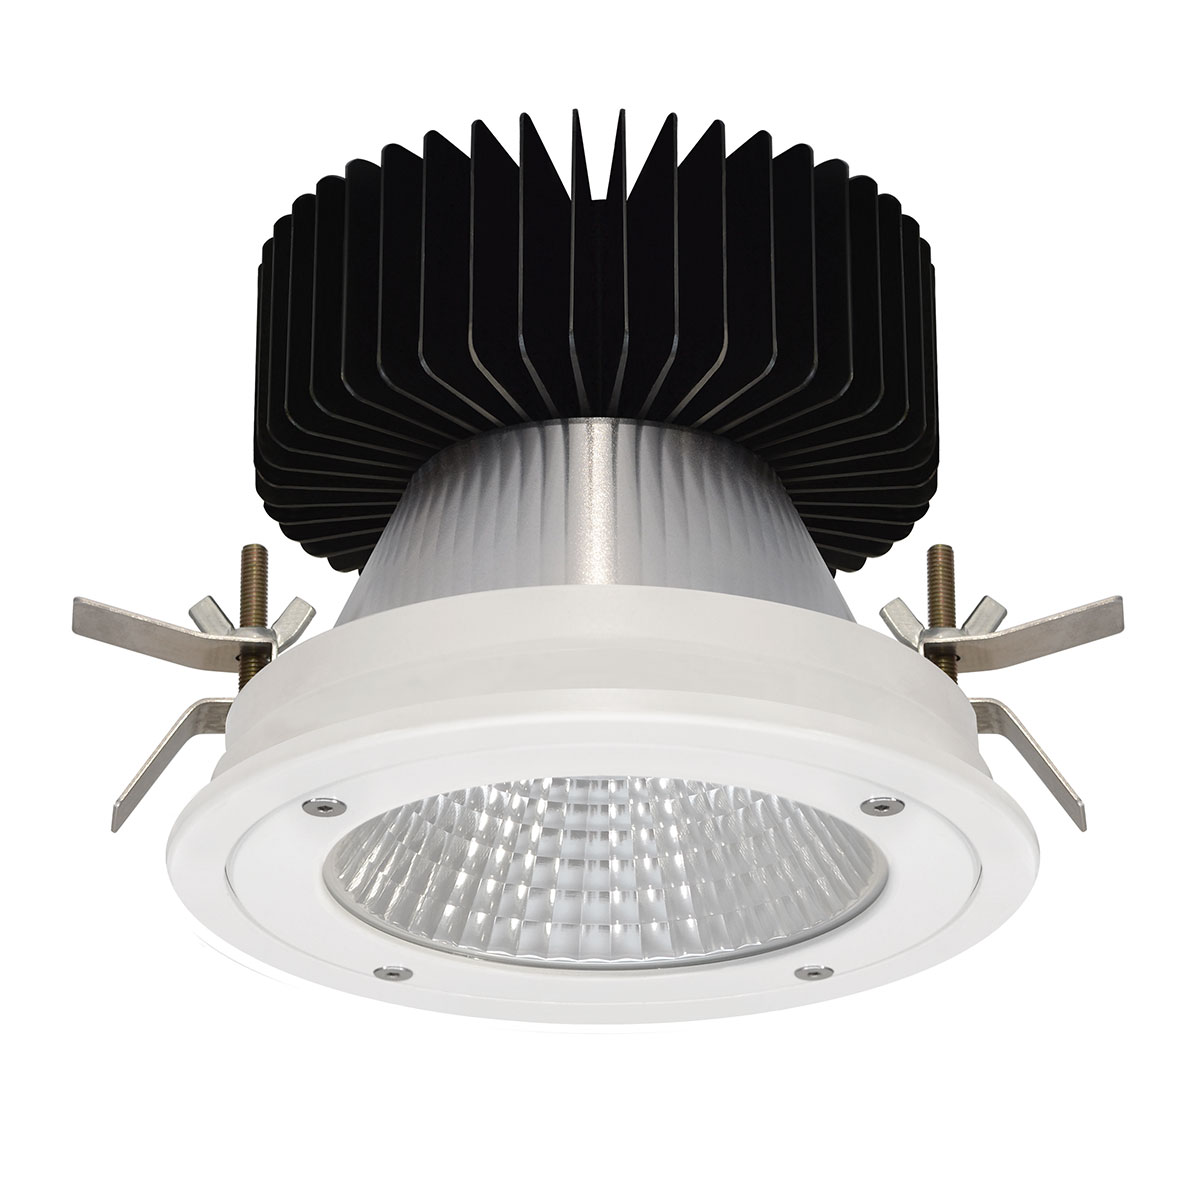 Kopa 16W Anti Tamper Fixed Round Recessed Downlight IP65 Rated 38° Degree Reflector Black